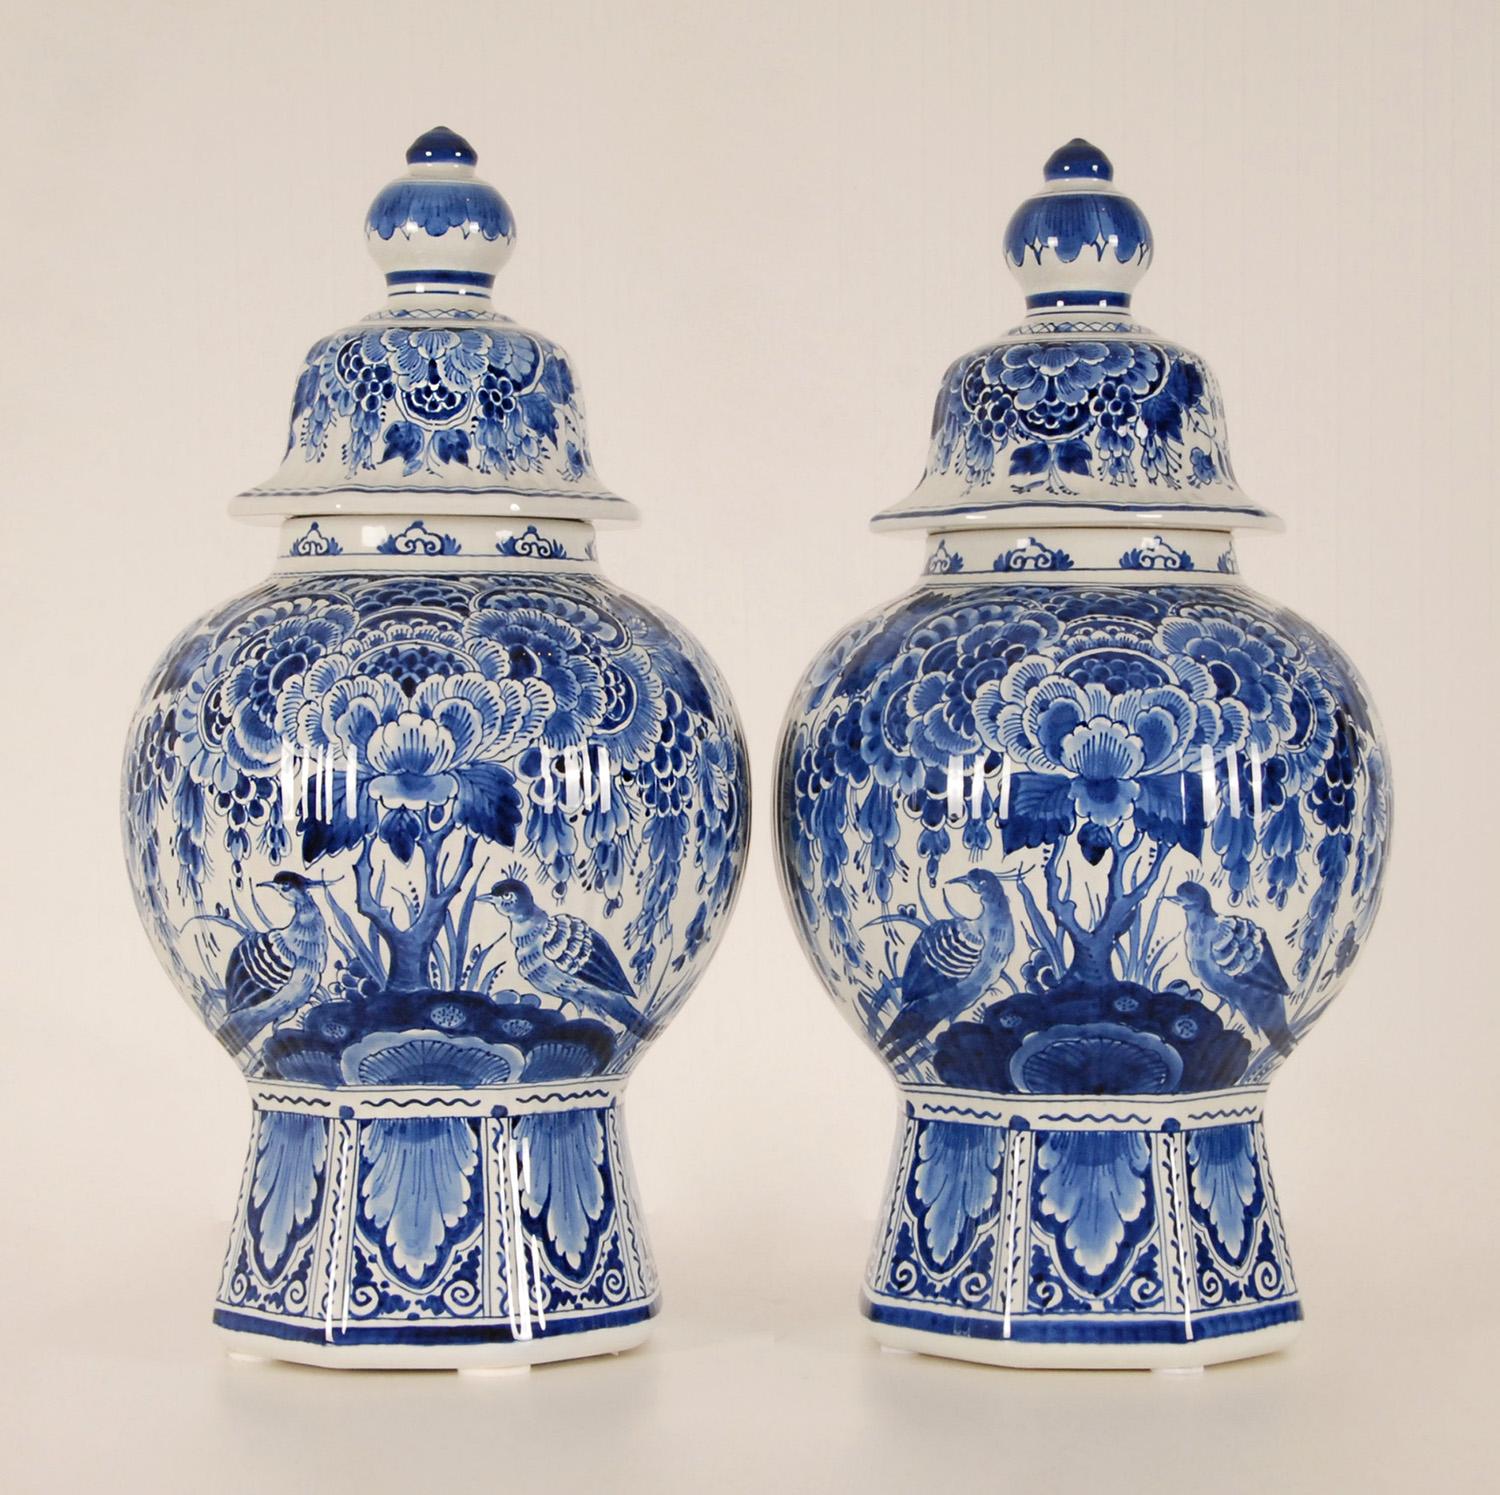 A pair Dutch Delftware Royal Delft vases - Urns.
Tall decorative covered baluster vases on an octagonal foot.
The vases are hand crafted and hand painted in enchanting blue colors, blue camaieu.
Floral decoration with peacock birds
Origin The